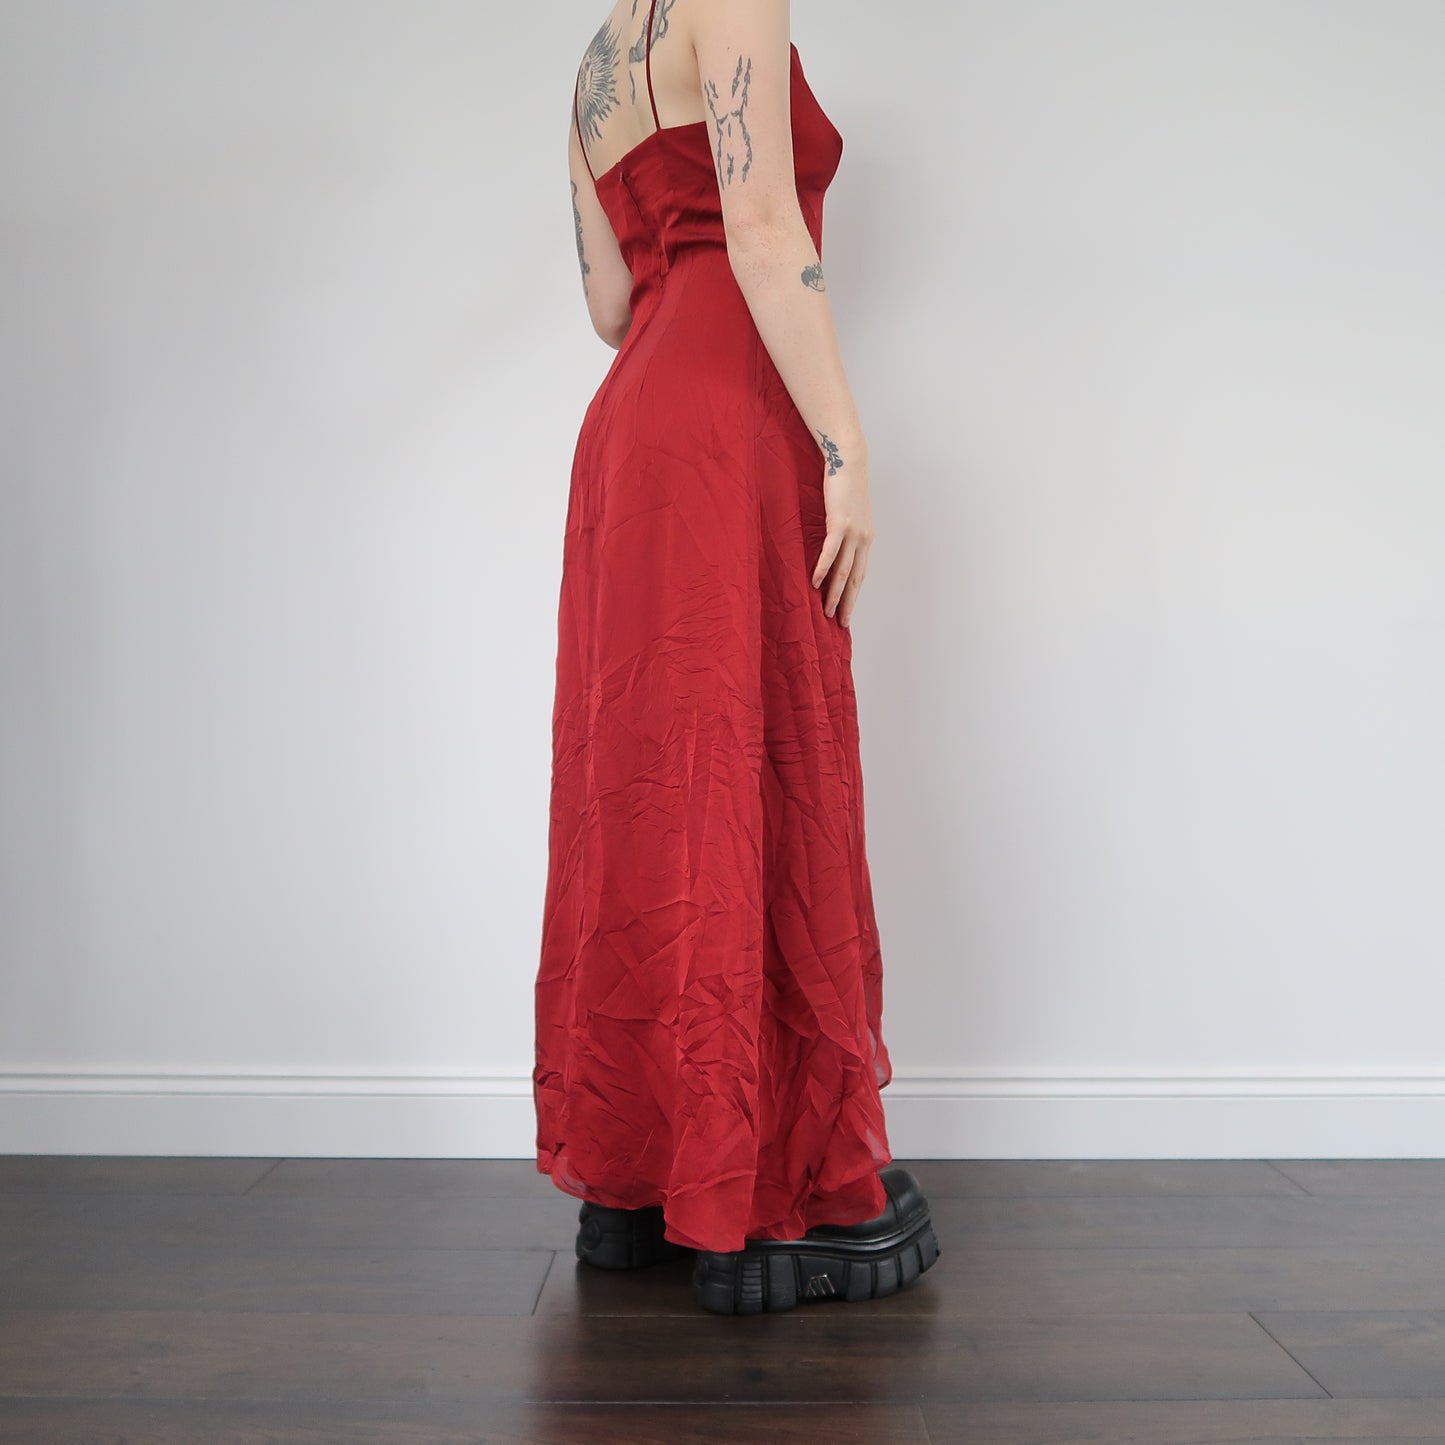 Red dress - size 10